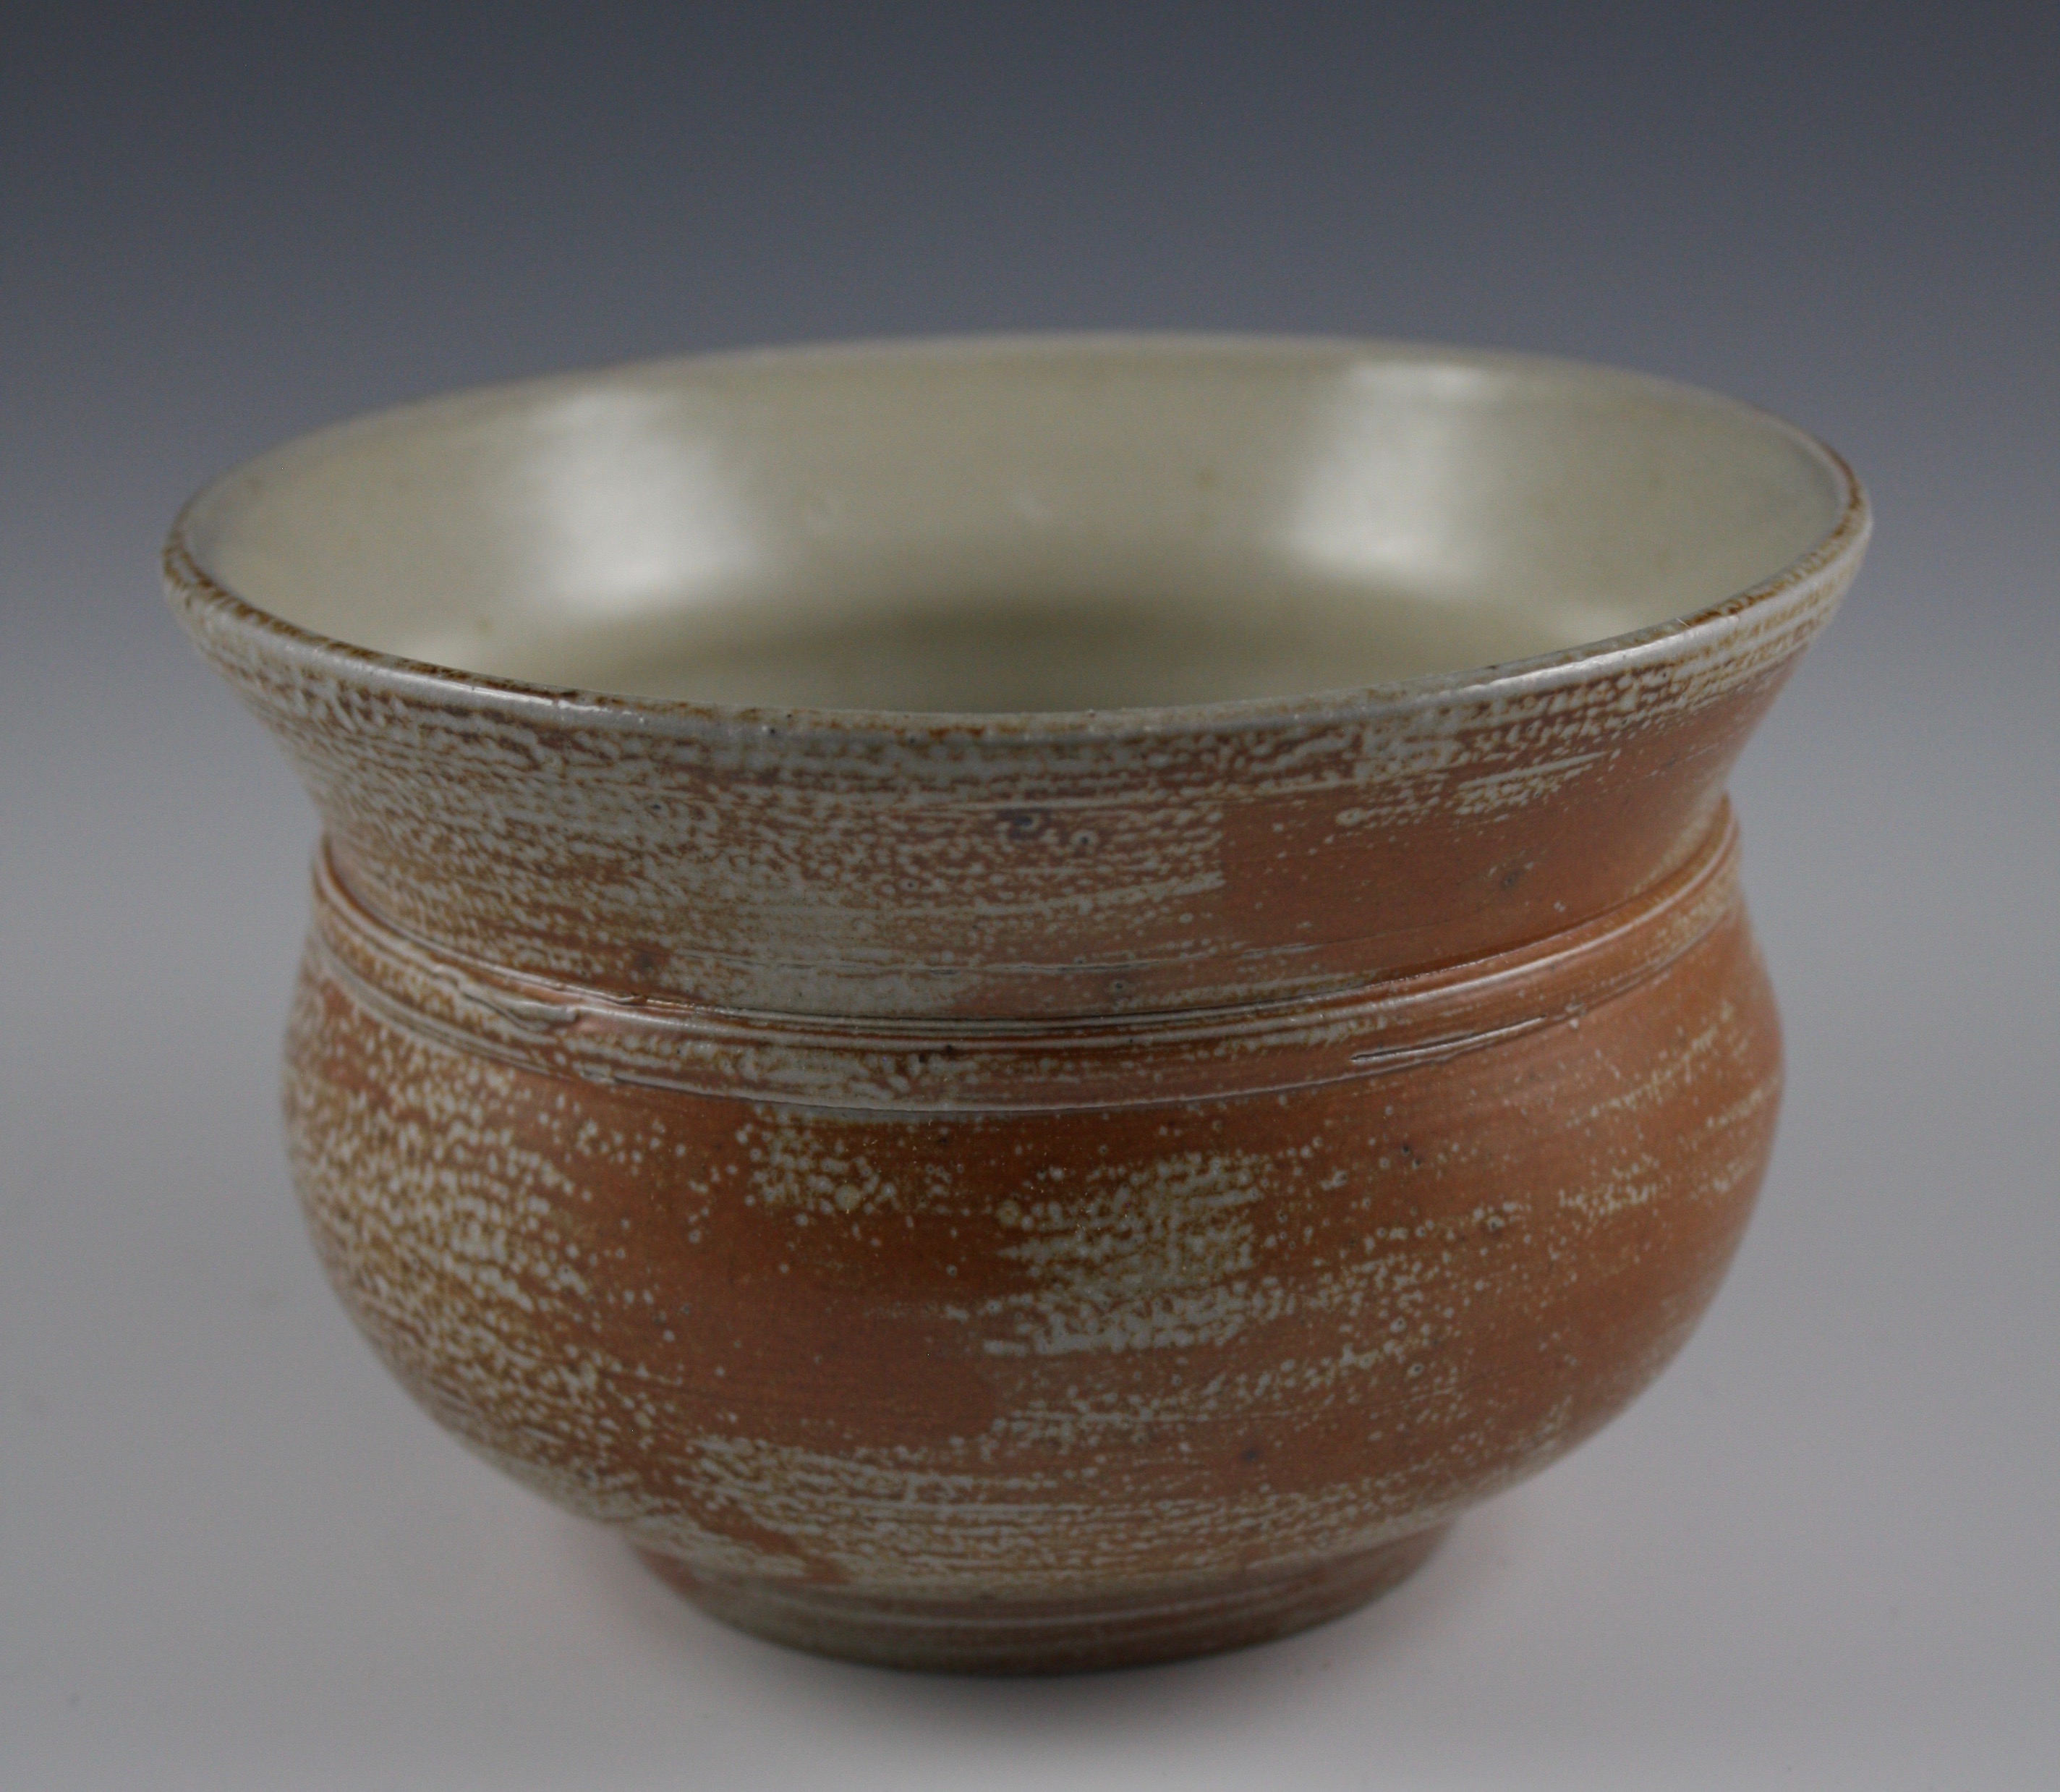 Spittoon-Shaped Bowl #30